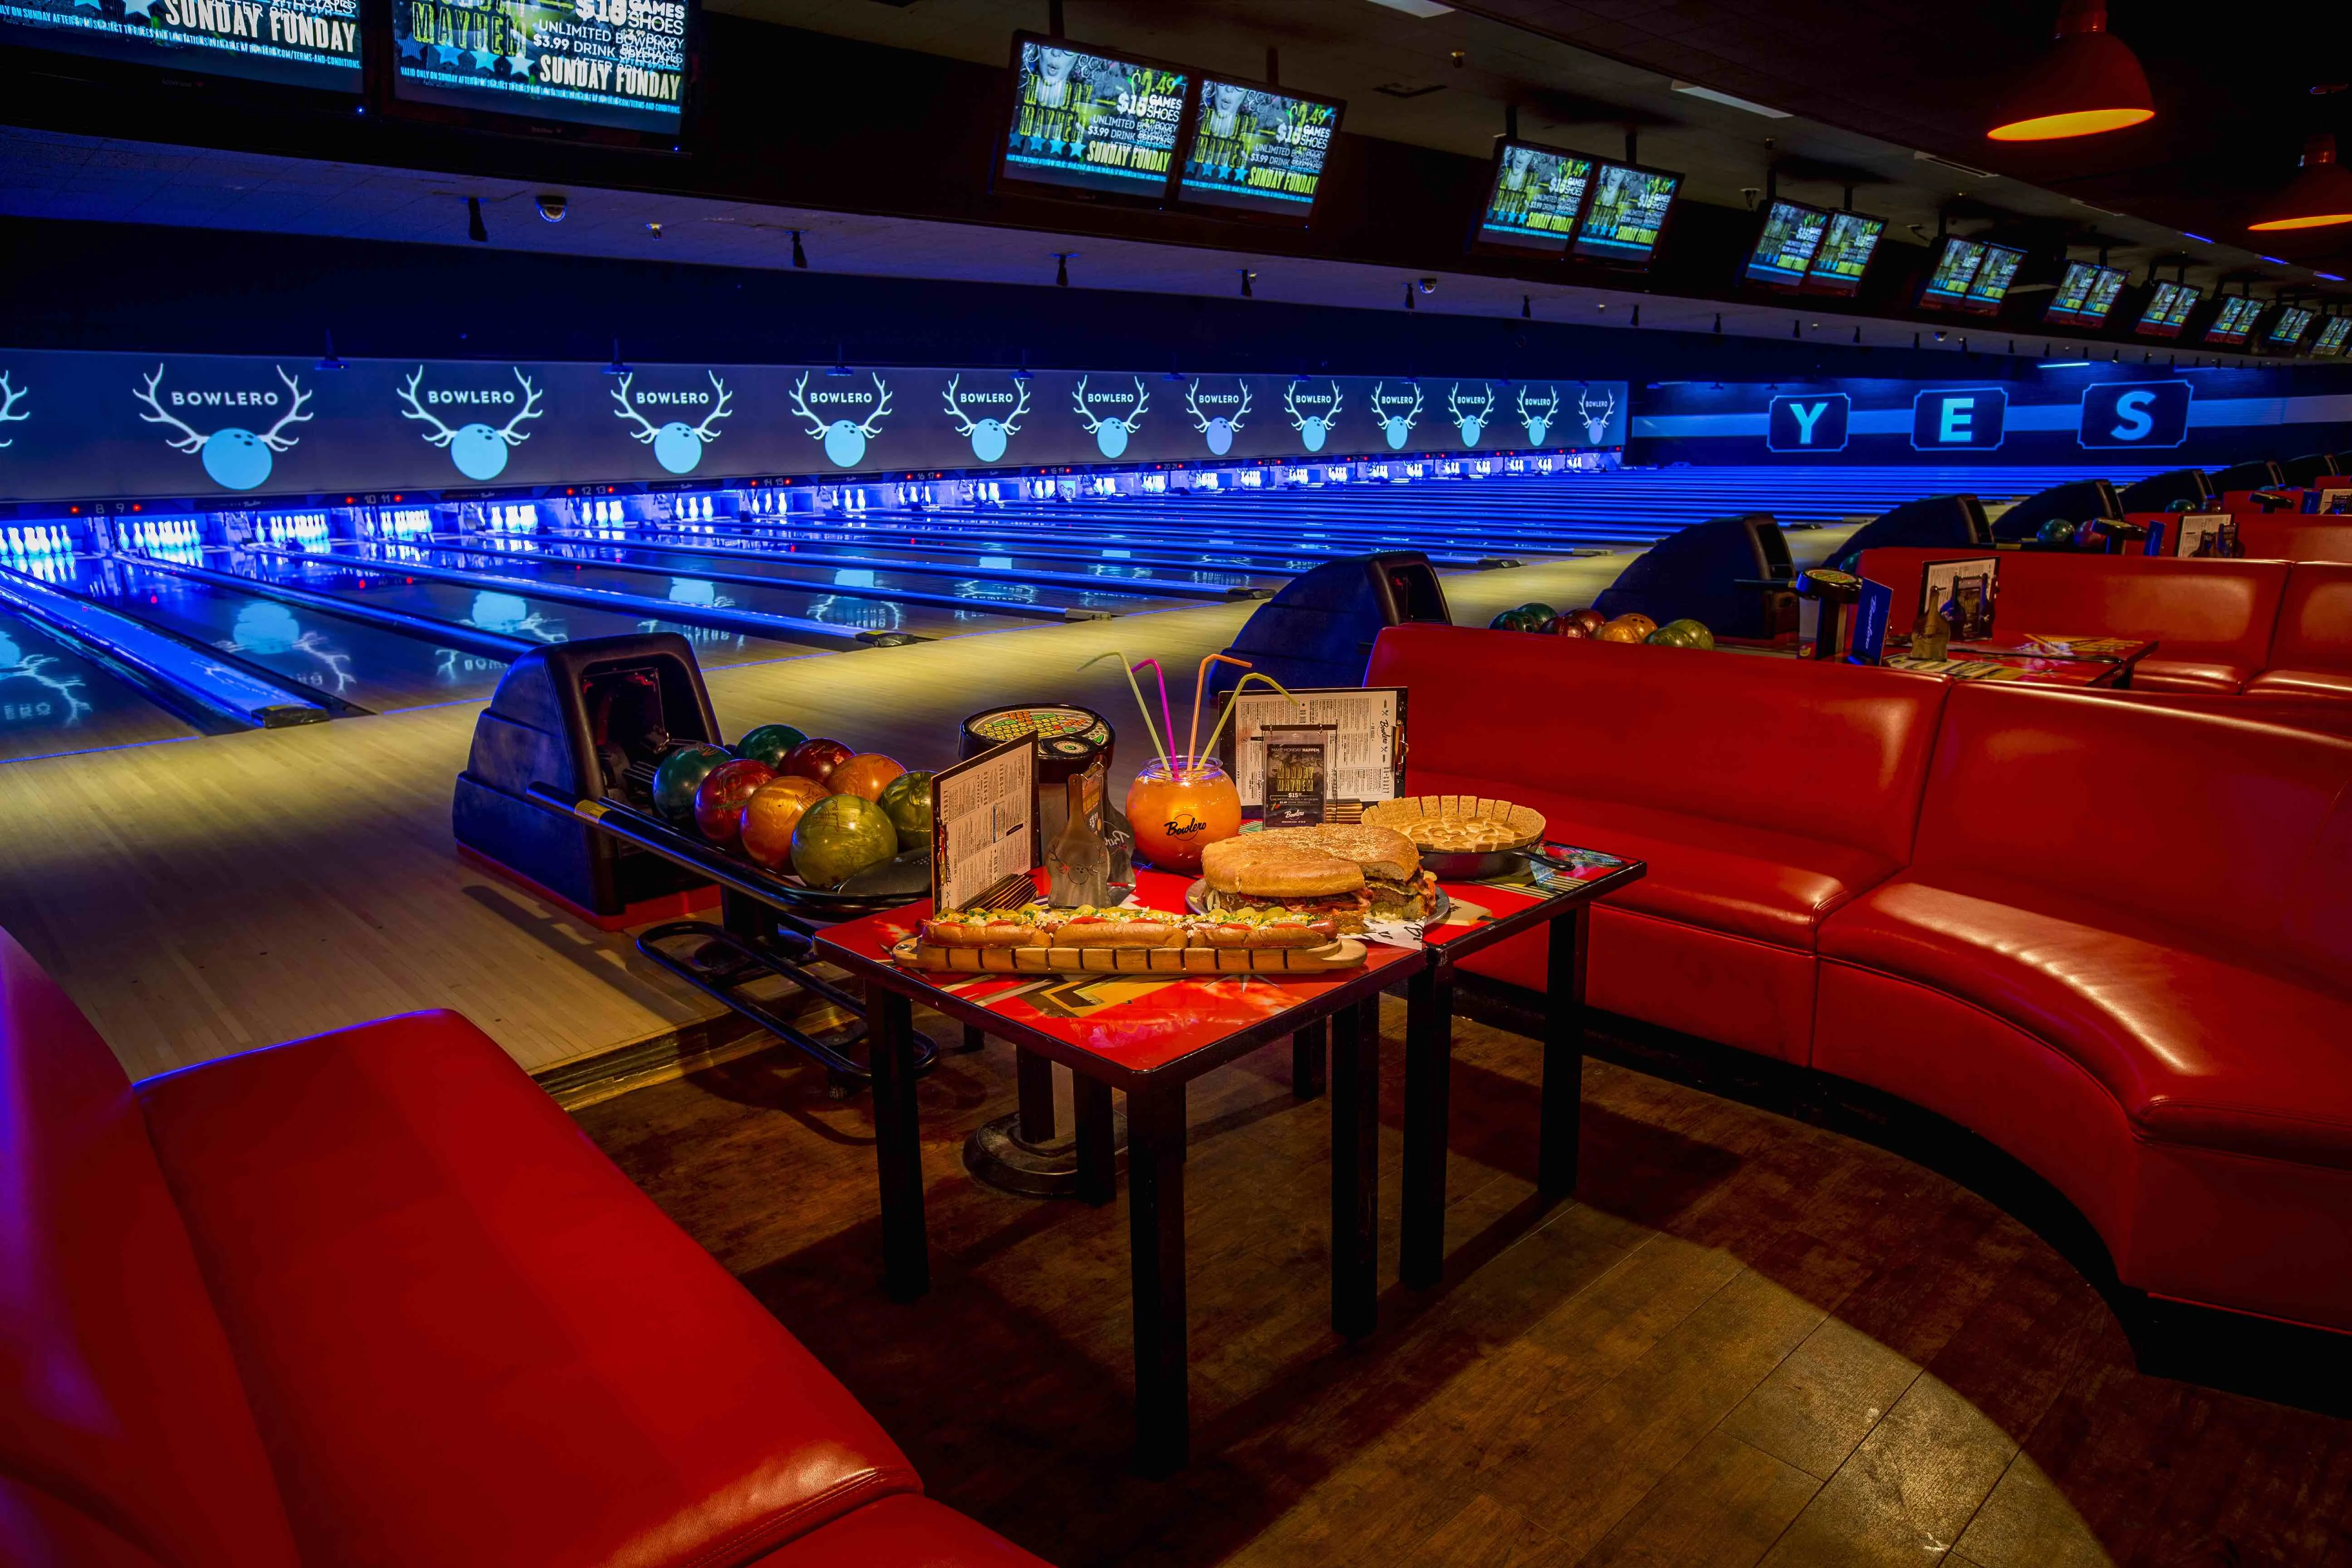 Going bowling is one of the fun things to do in Woodland Hills with kids